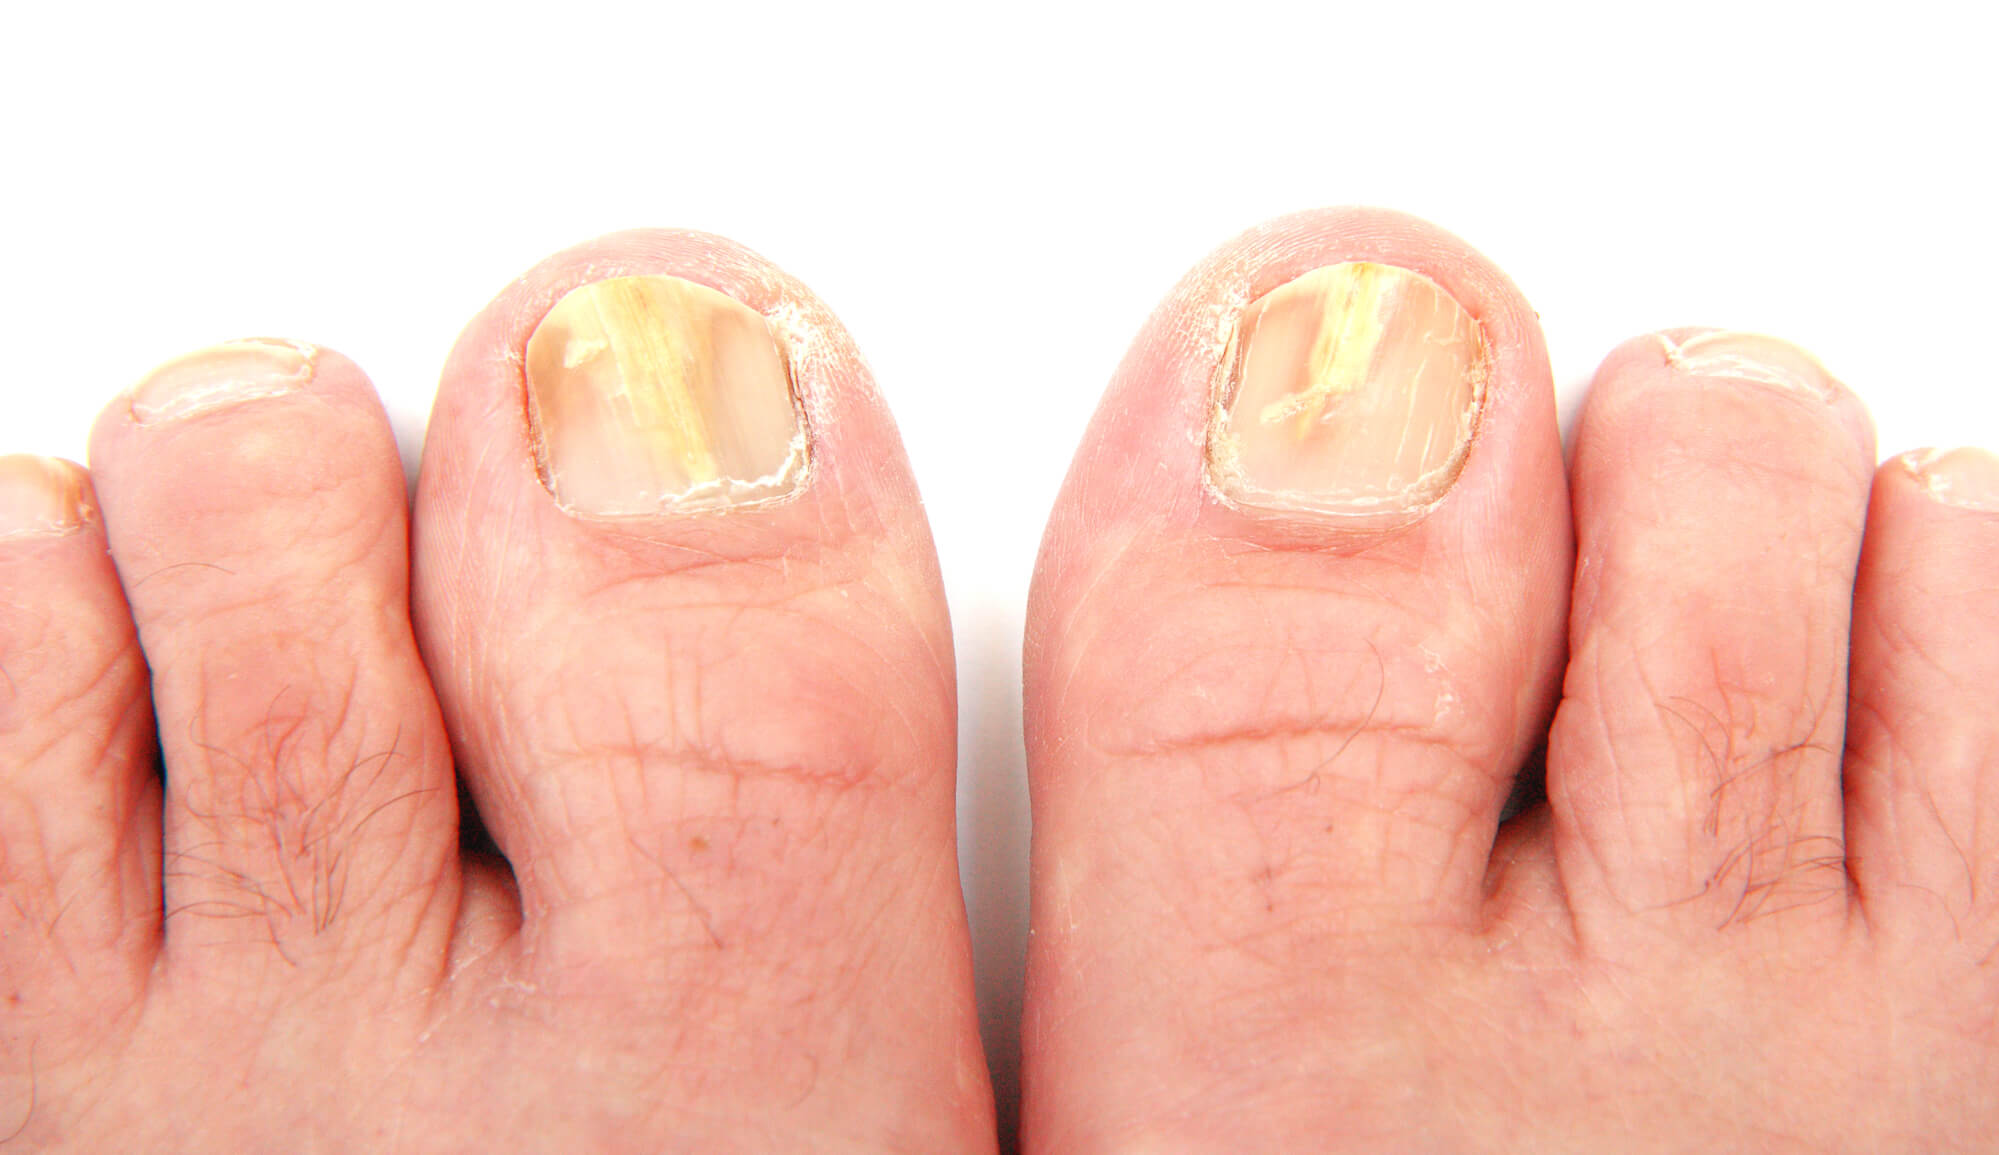 Toenails infected with a fungus